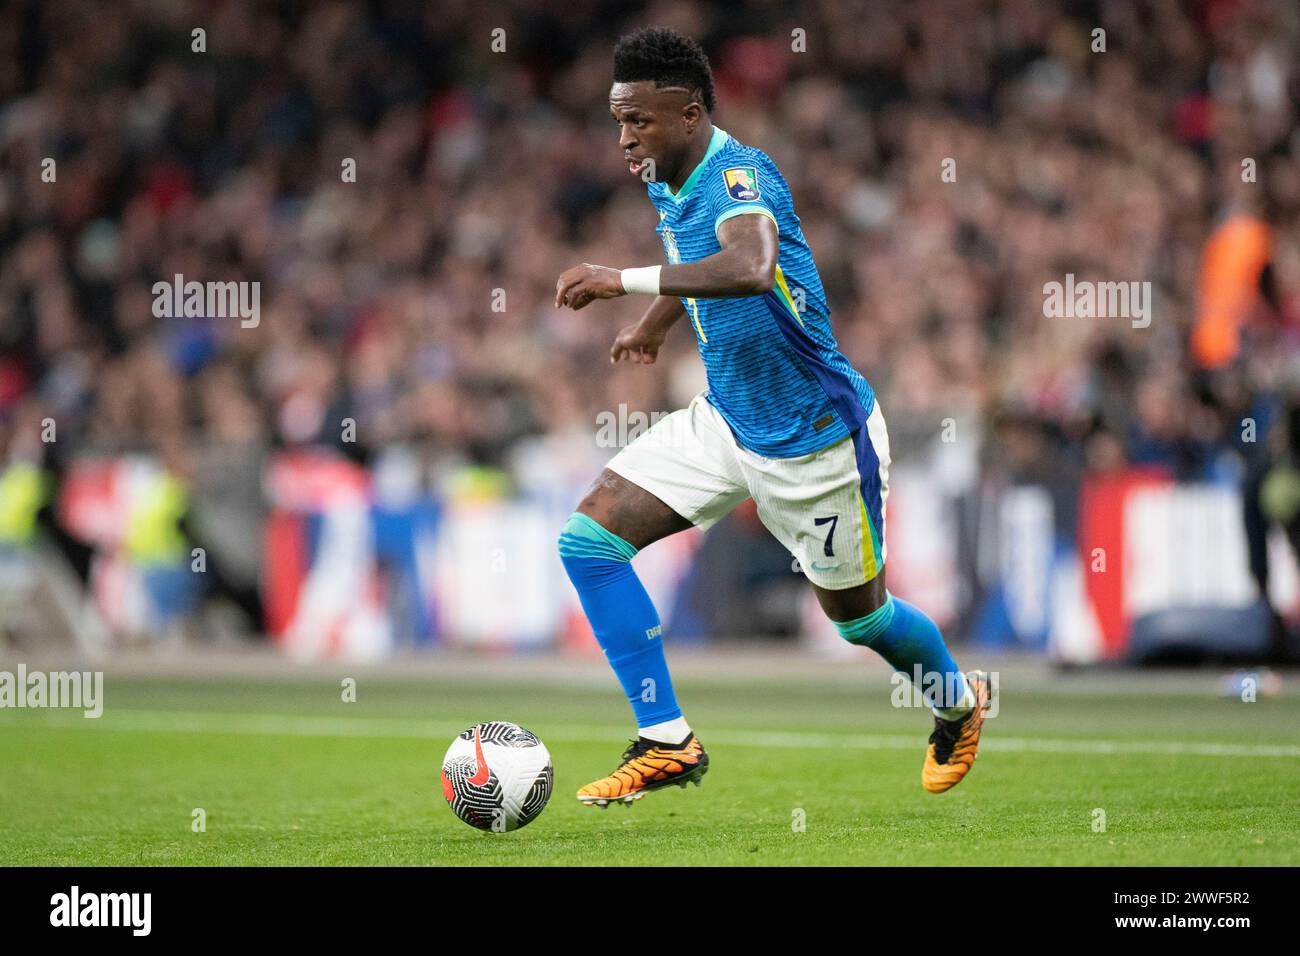 London, UK. 23 March, 2024. Vinicius Junior #7 of Brazil in action during the International Friendly match between England and Brazil at Wembley Stadium, London on Saturday 23rd March 2024. (Photo: Mike Morese | MI News) Credit: MI News & Sport /Alamy Live News Stock Photo